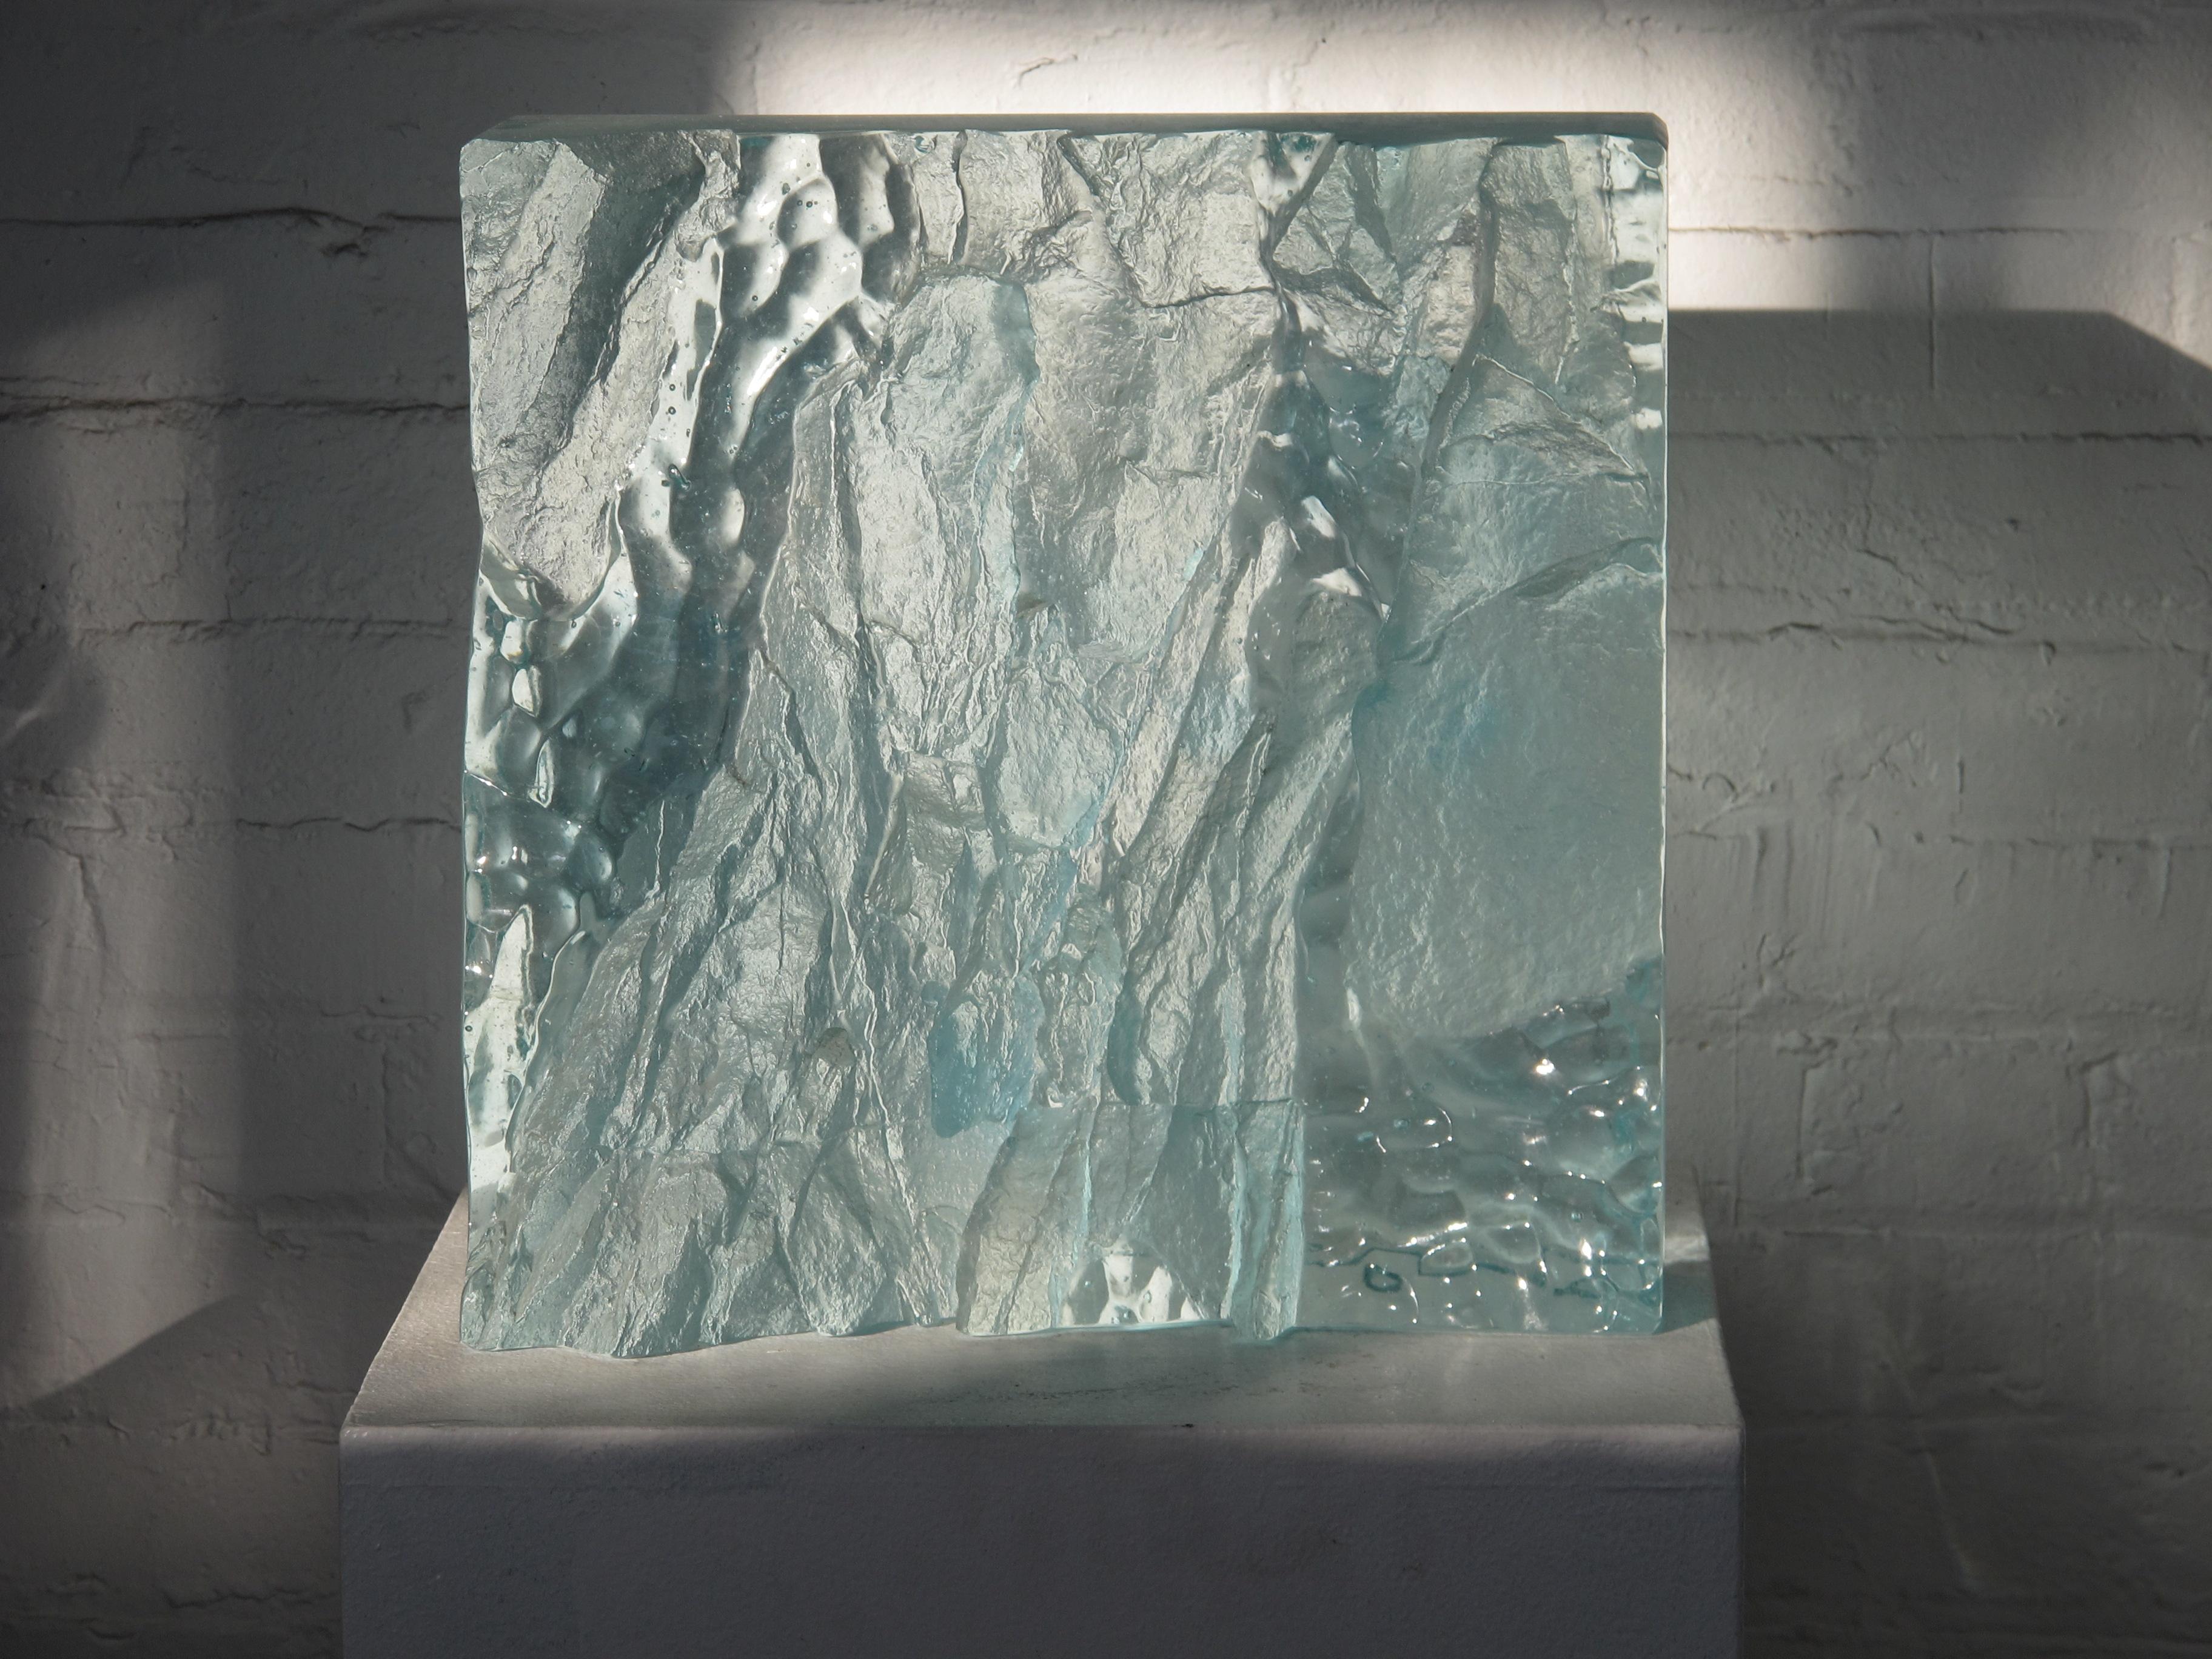 Contemporary Cast Glass Sculpture, 'Norsel 2', 2011 by David Ruth For Sale 3